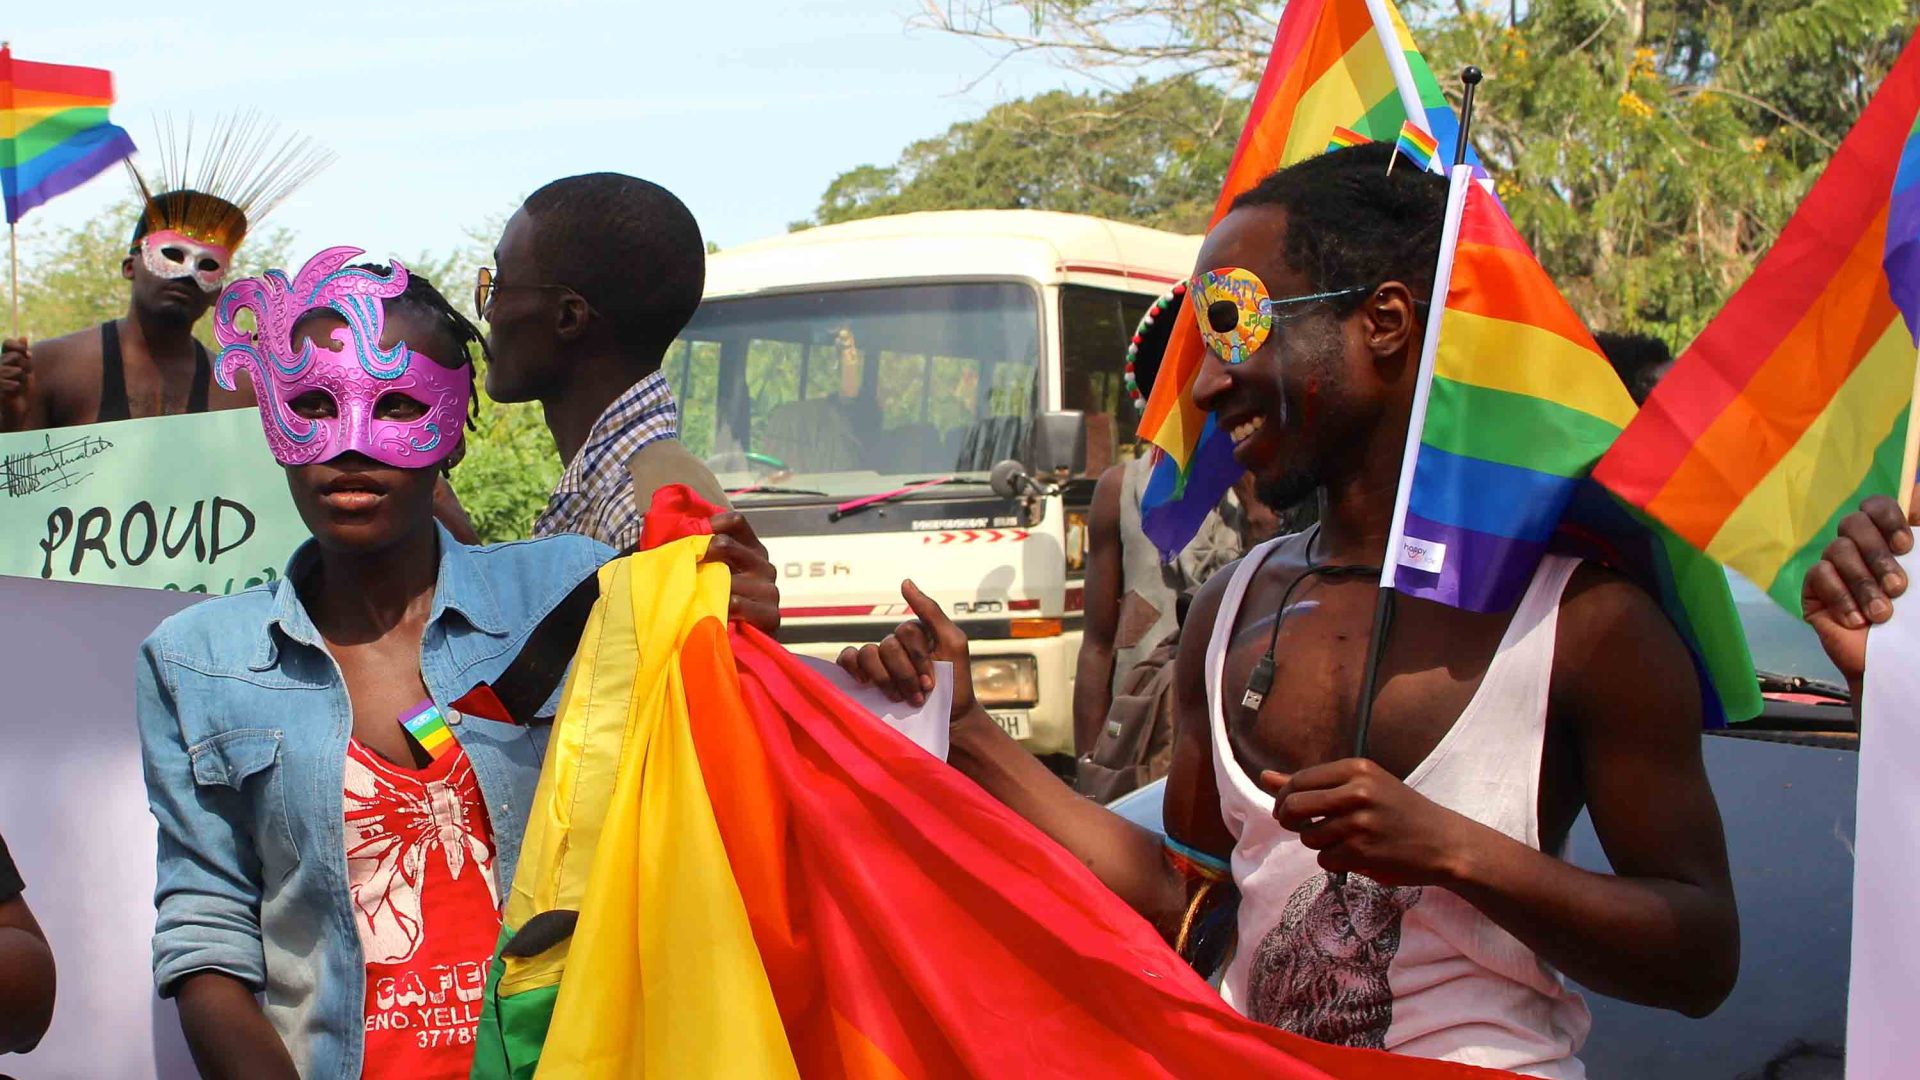 People wearing decorative masks over their eyes and holding pride flags walk in front of a white bus in a pride parade.